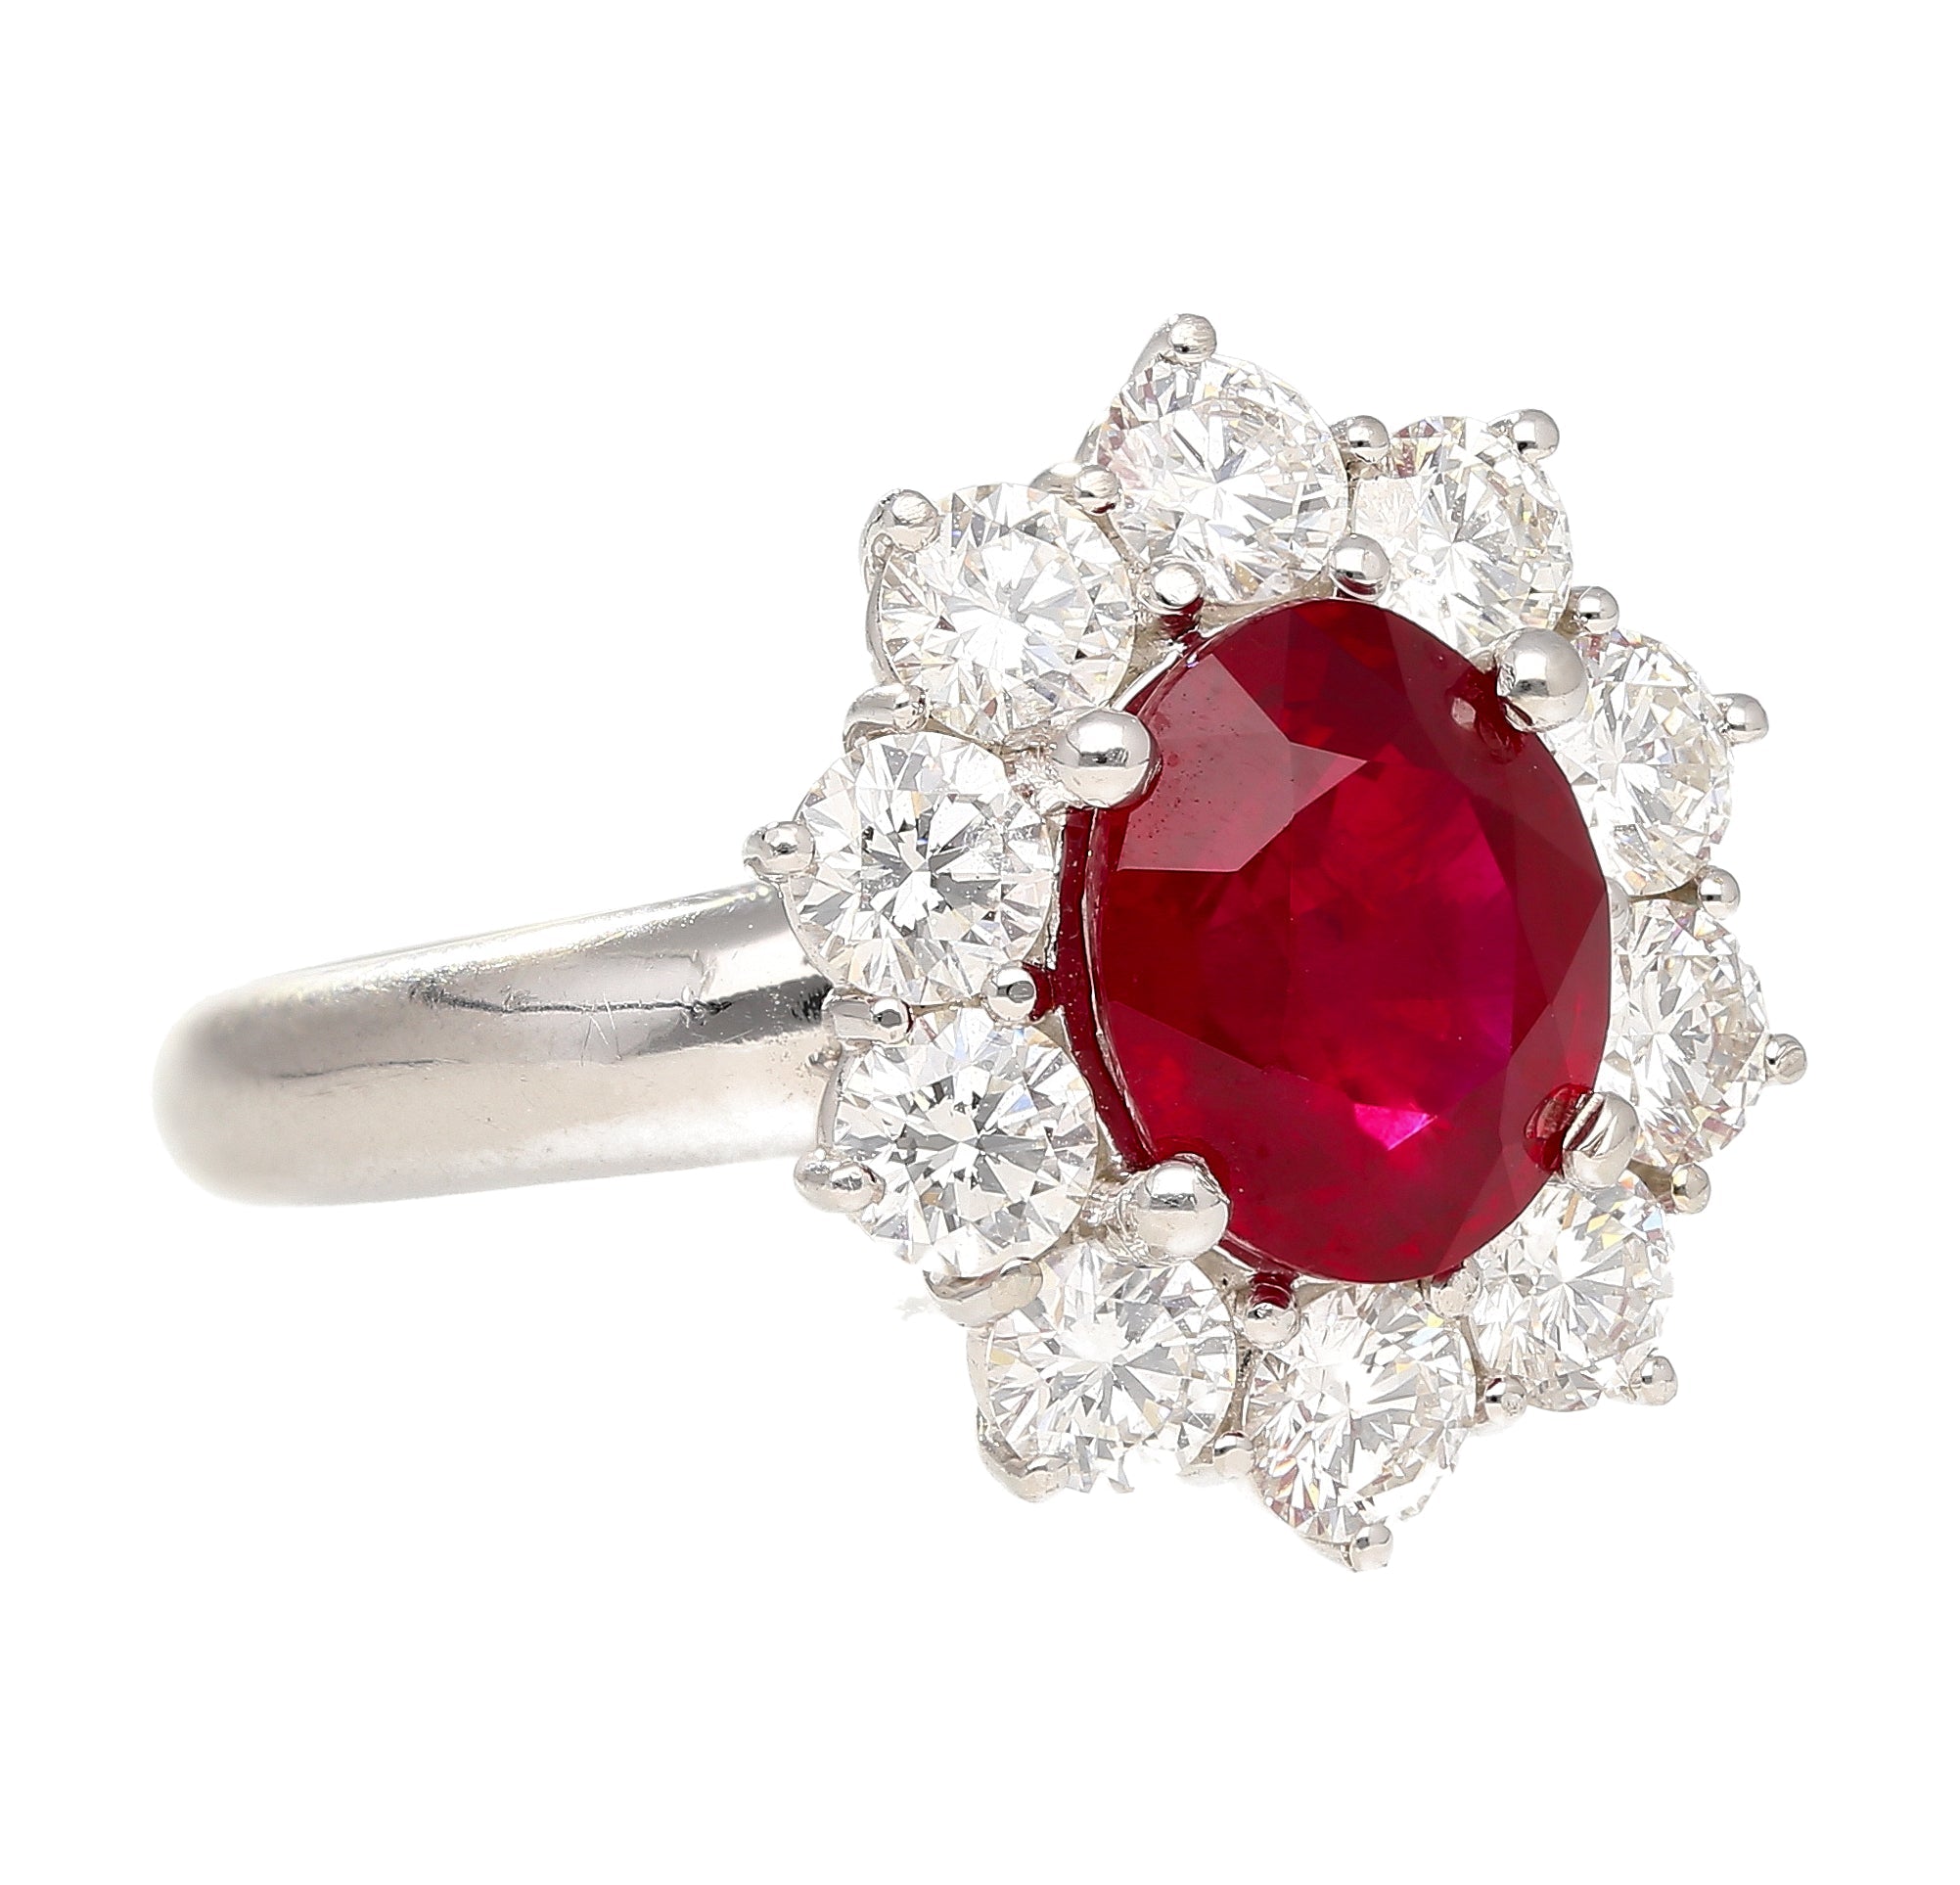 GRS Certified 3 carat Vivid Red "Pigeon Blood" Oval Cut Burma Ruby Ring with Diamond Halo